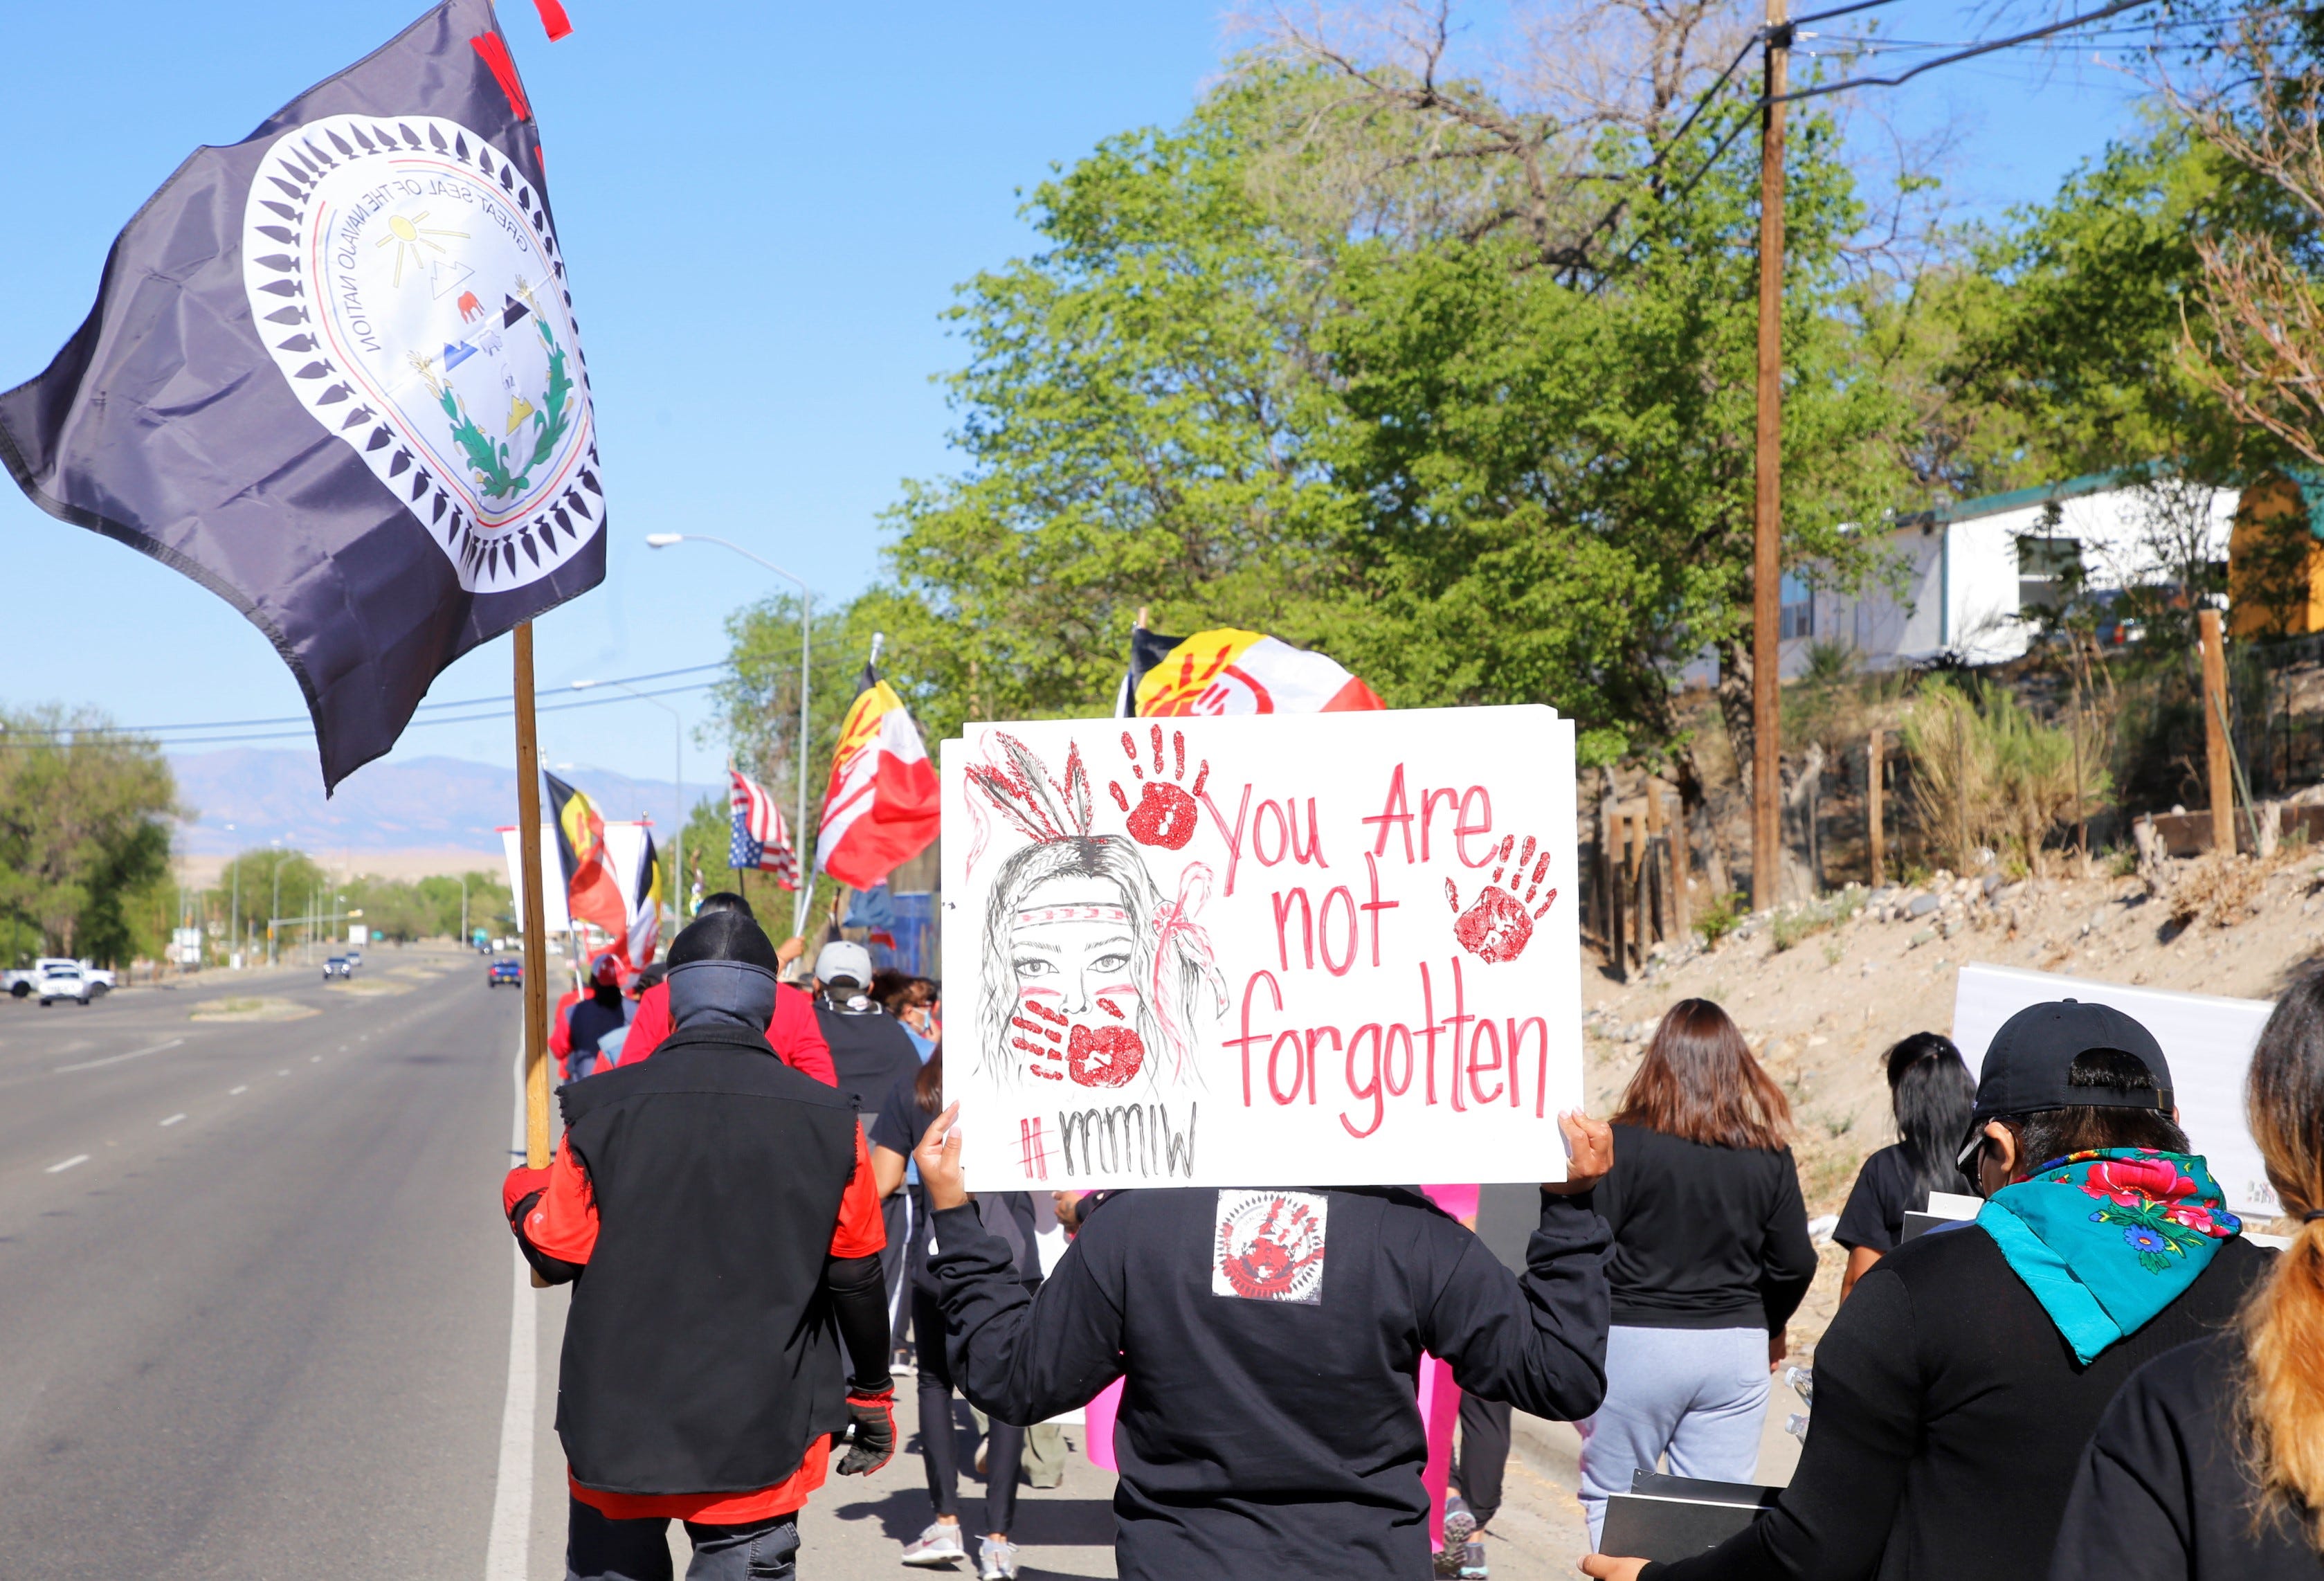 Participants carried signs with messages about Missing and Murdered Indigenous Women during the May 5 walk in Shiprock.